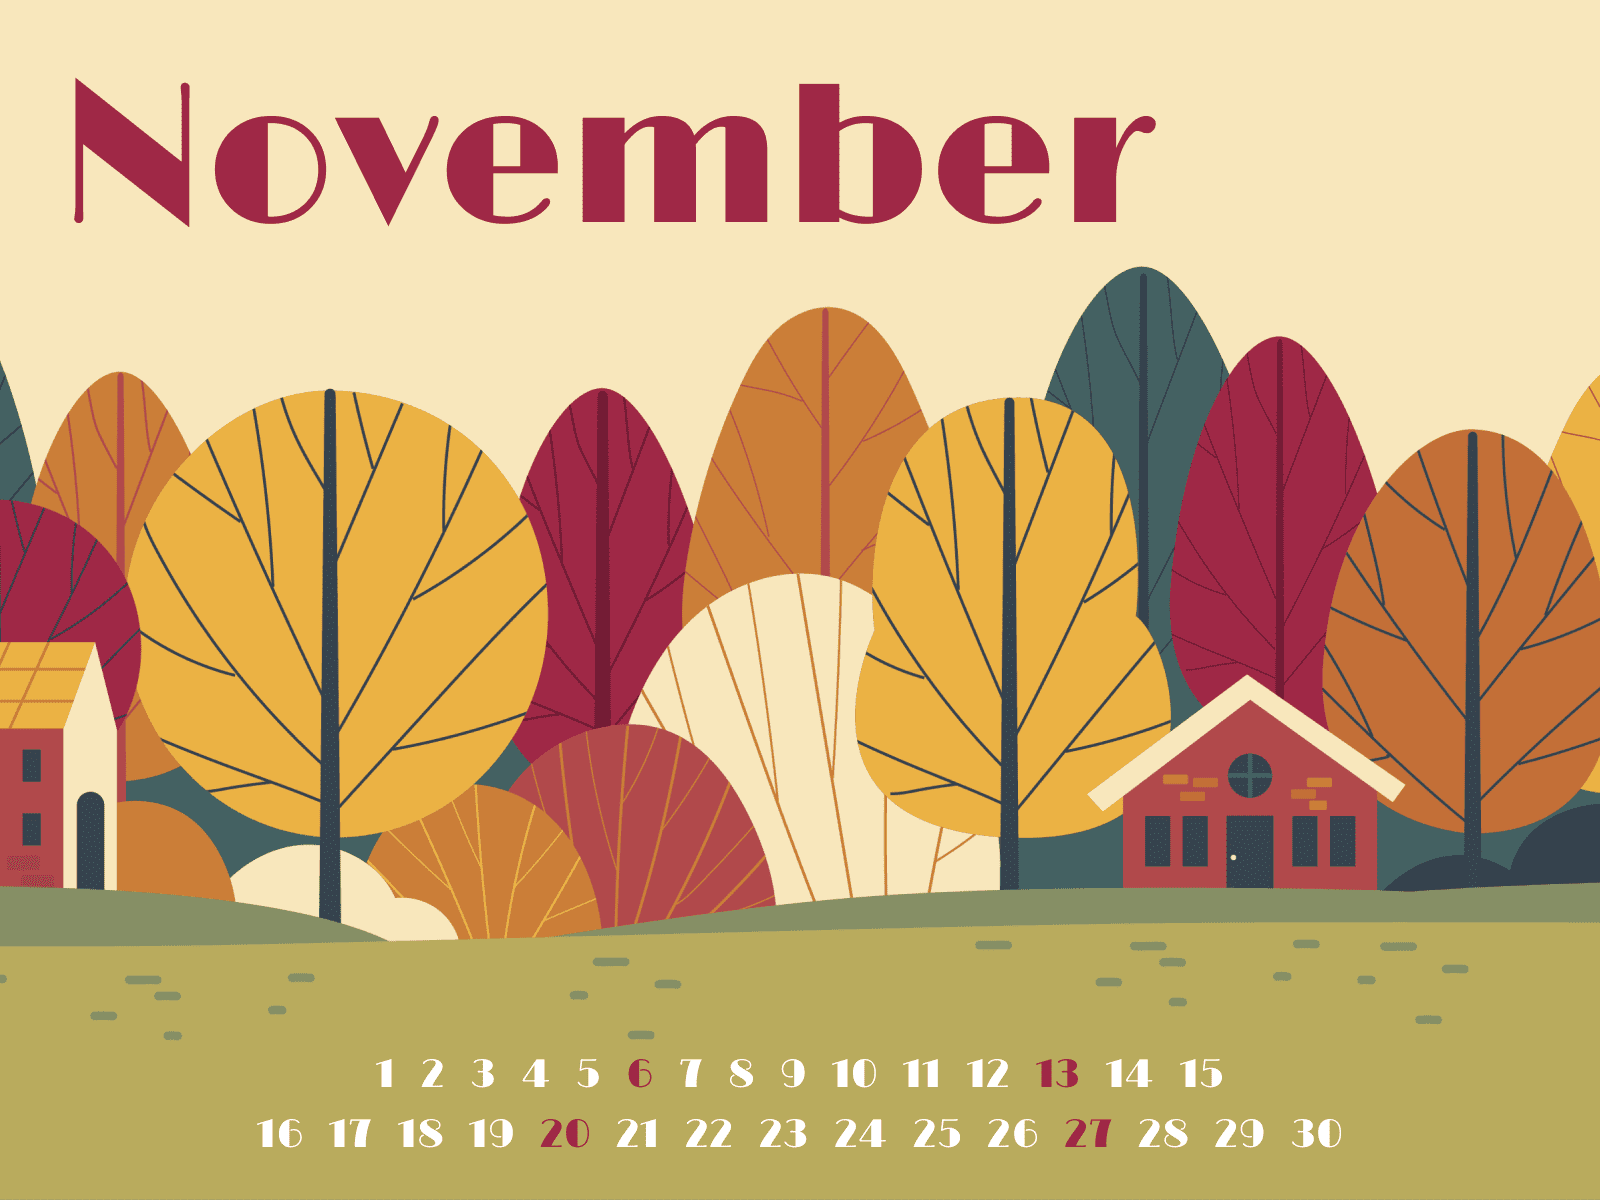 Free calendar for November with autumn forest background and month numbers at the bottom.